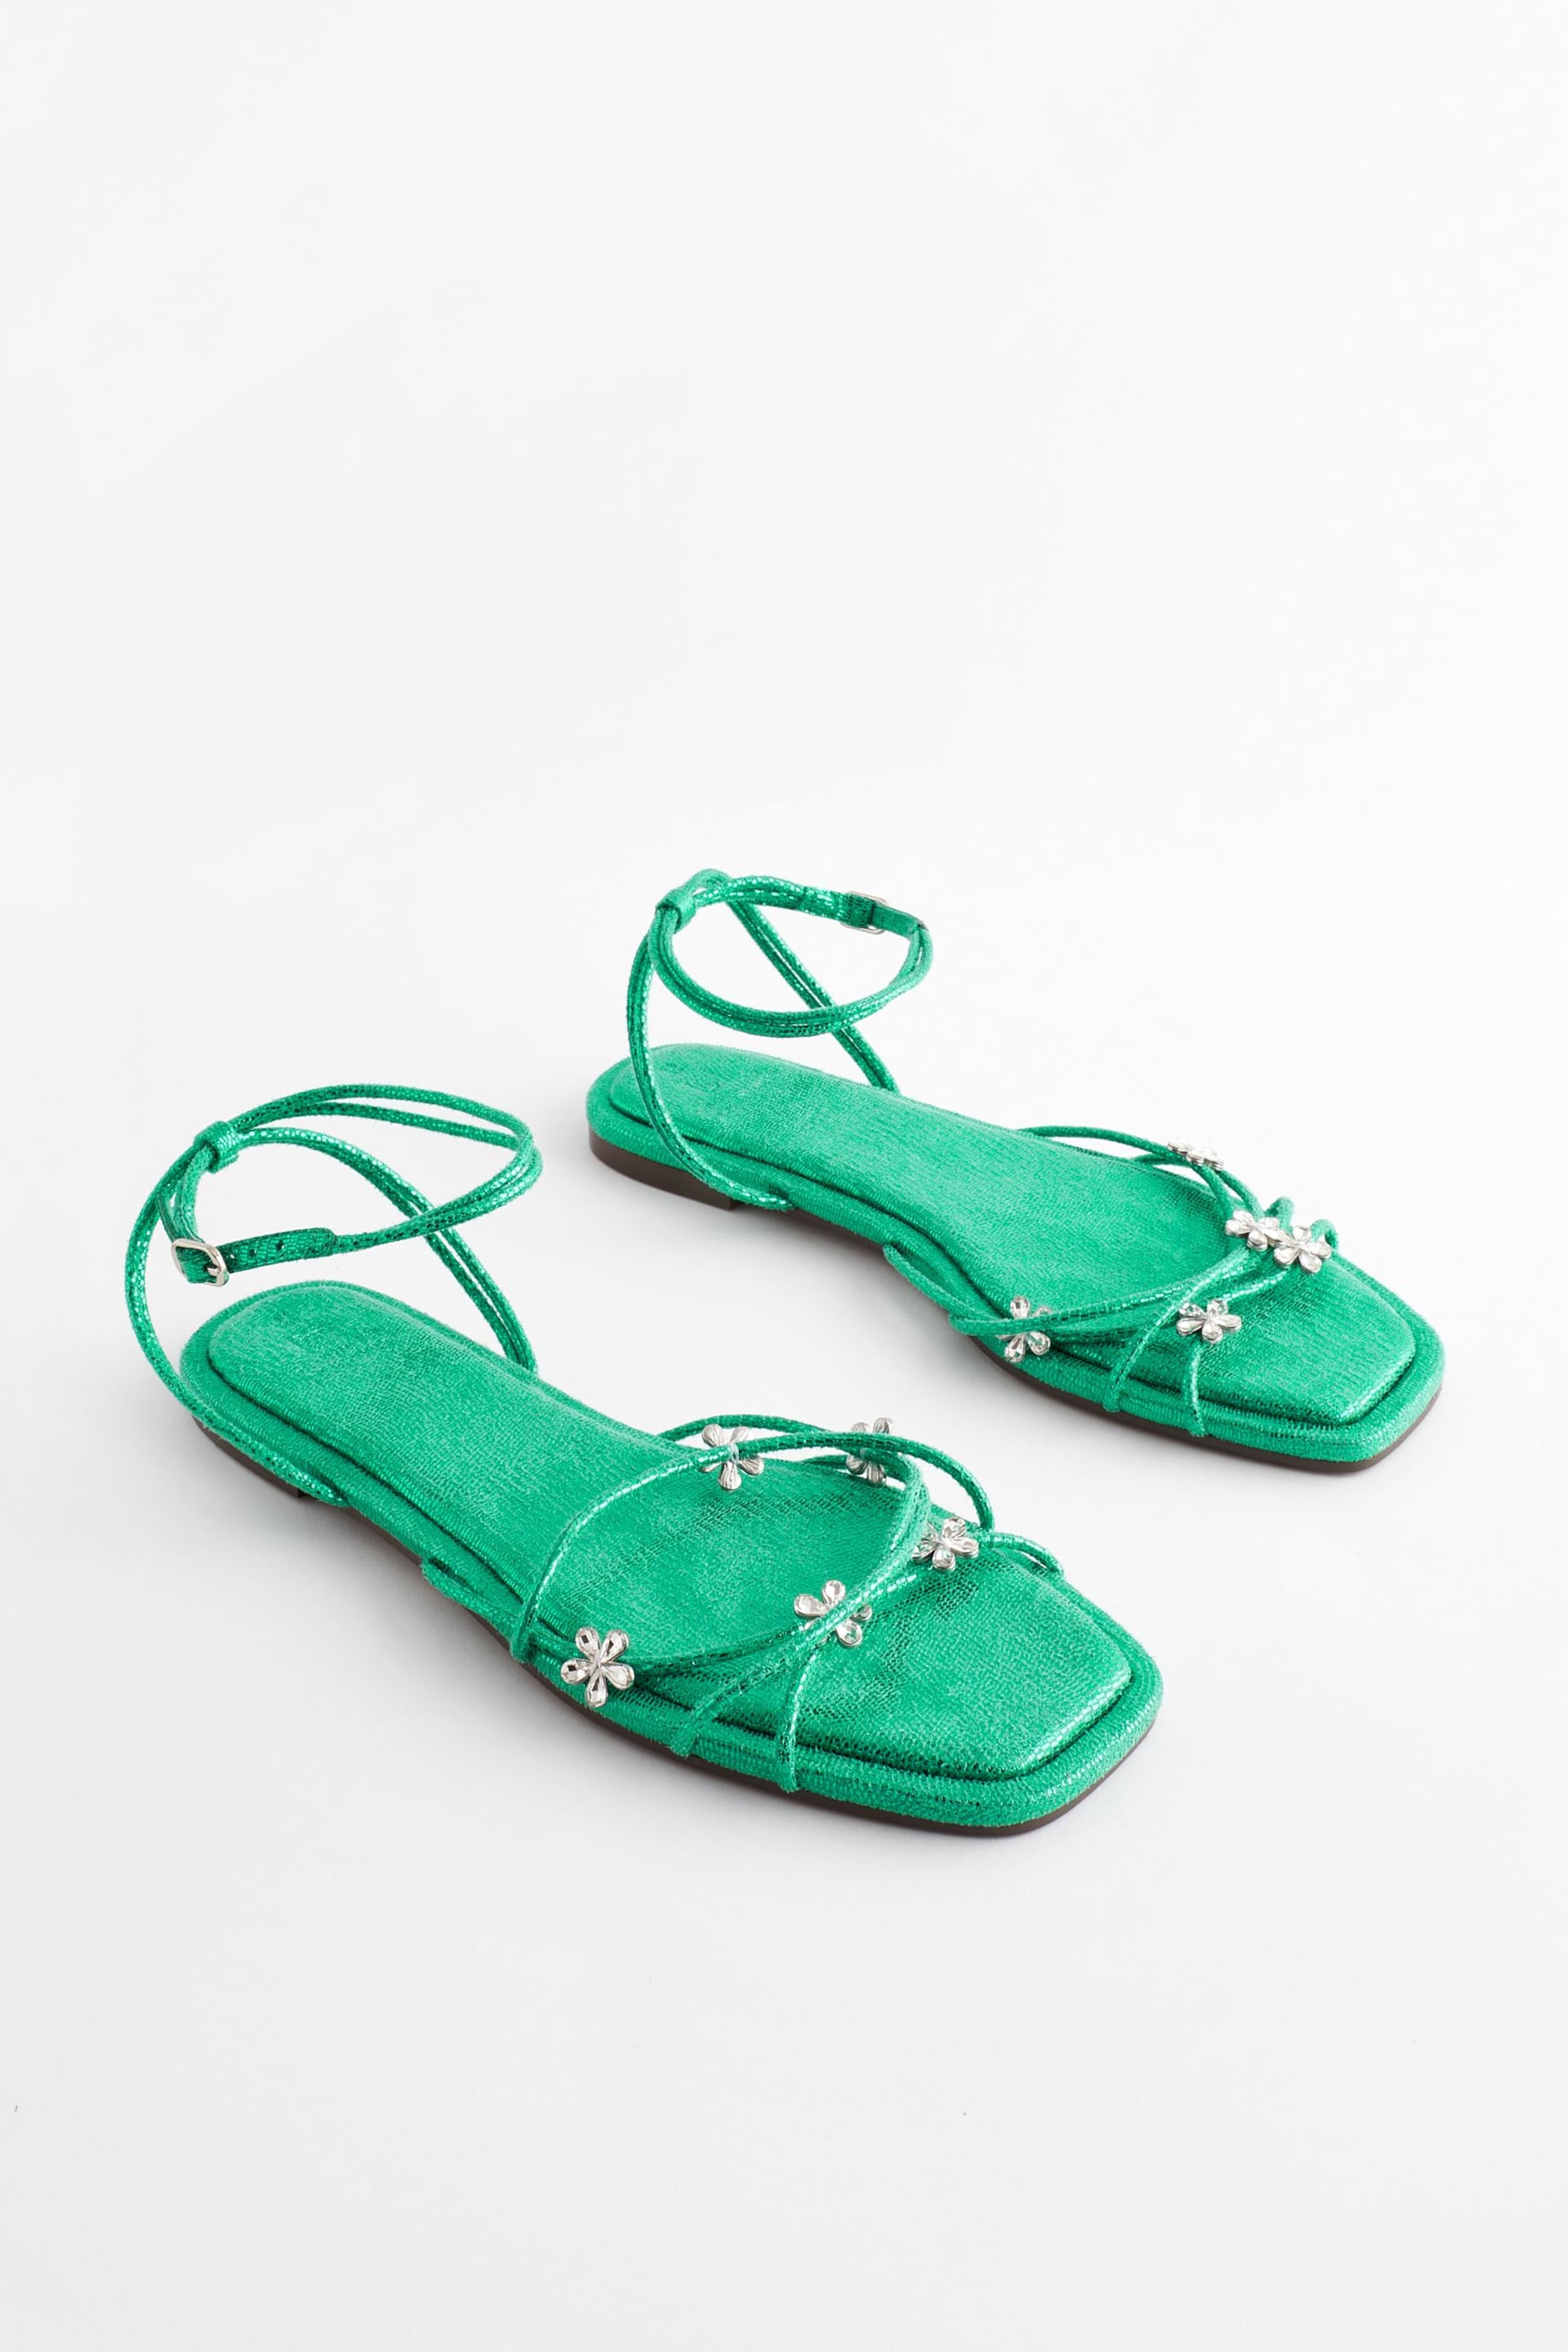 Green Metallic Jewelled Flower Strappy Sandals - Image 5 of 10